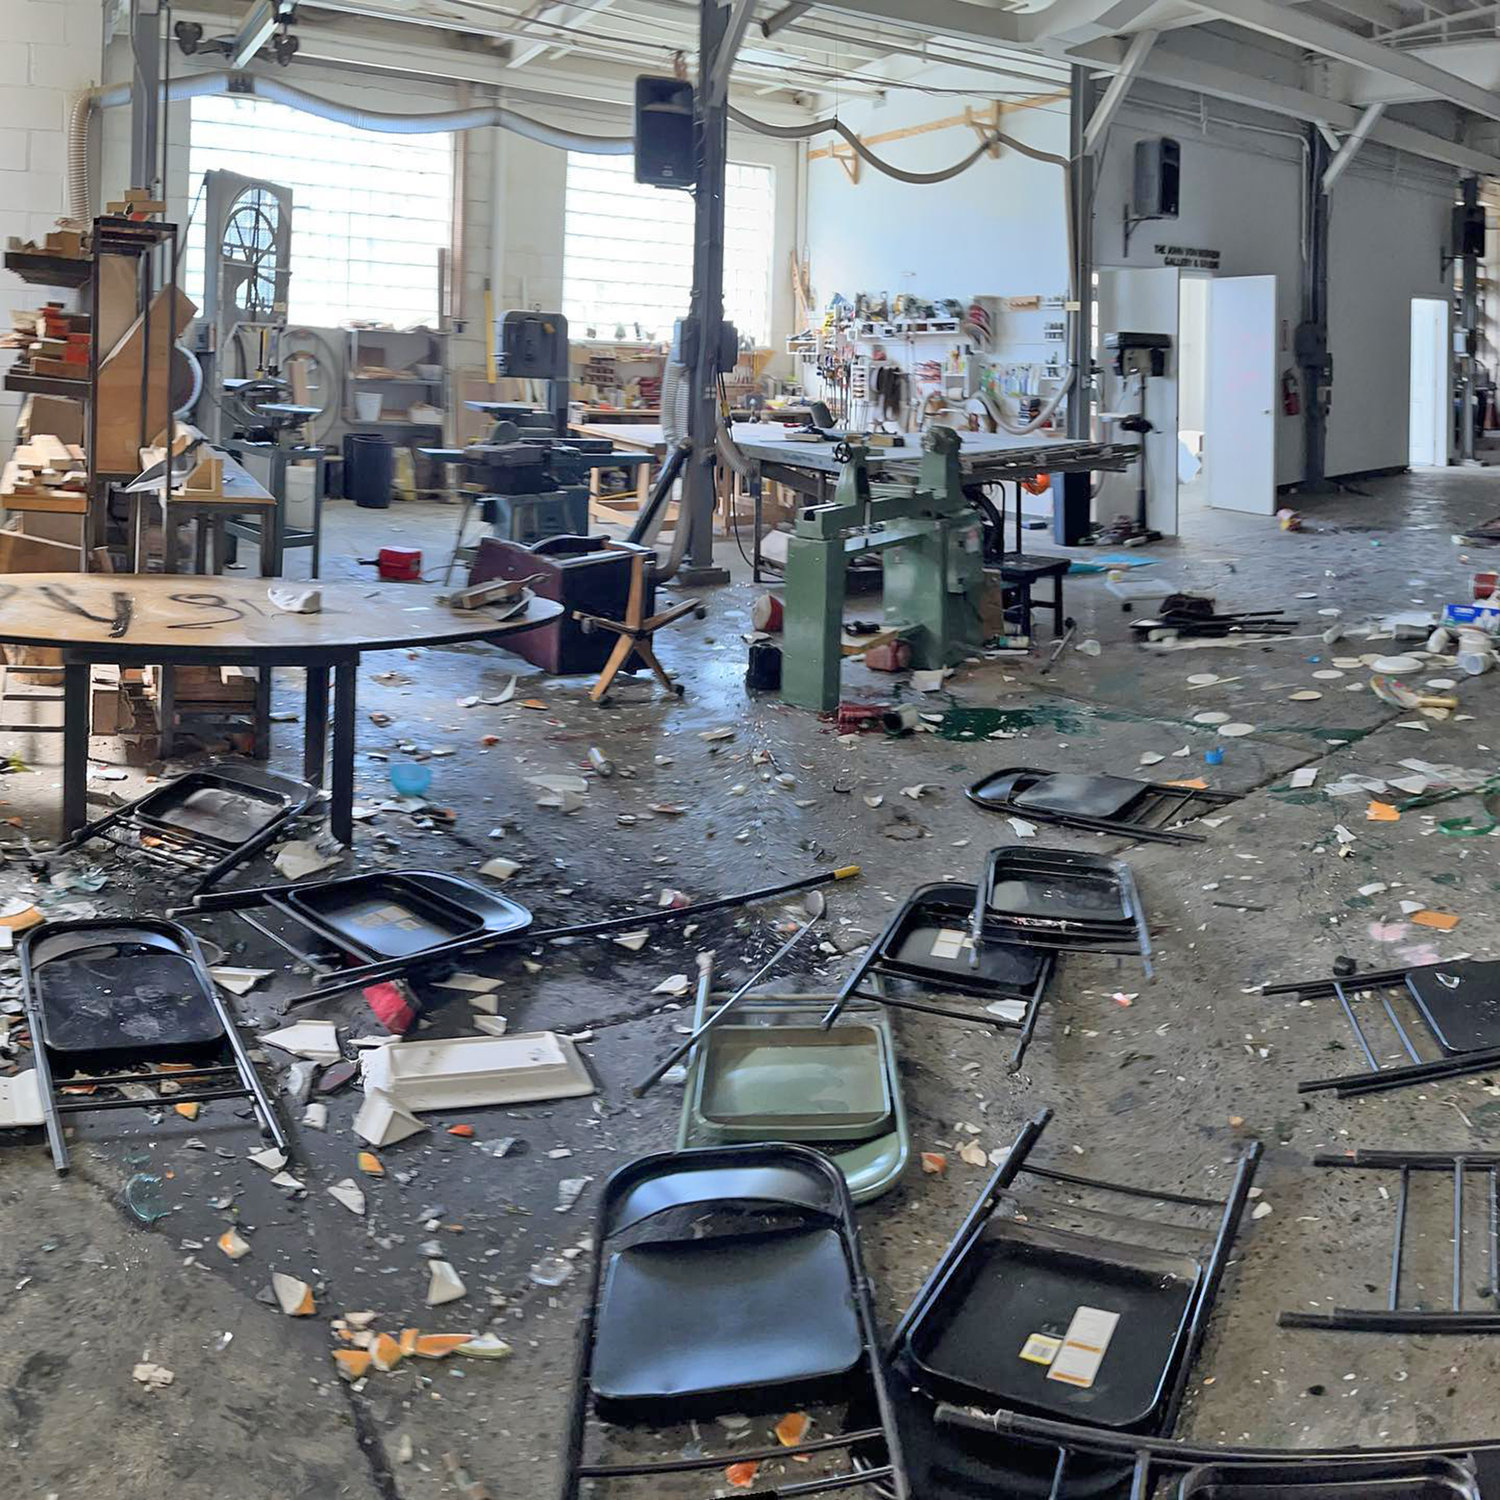 Smashed items and chairs are strewn about the Sculpture Space art studio on Gates Street in Utica on Sunday.